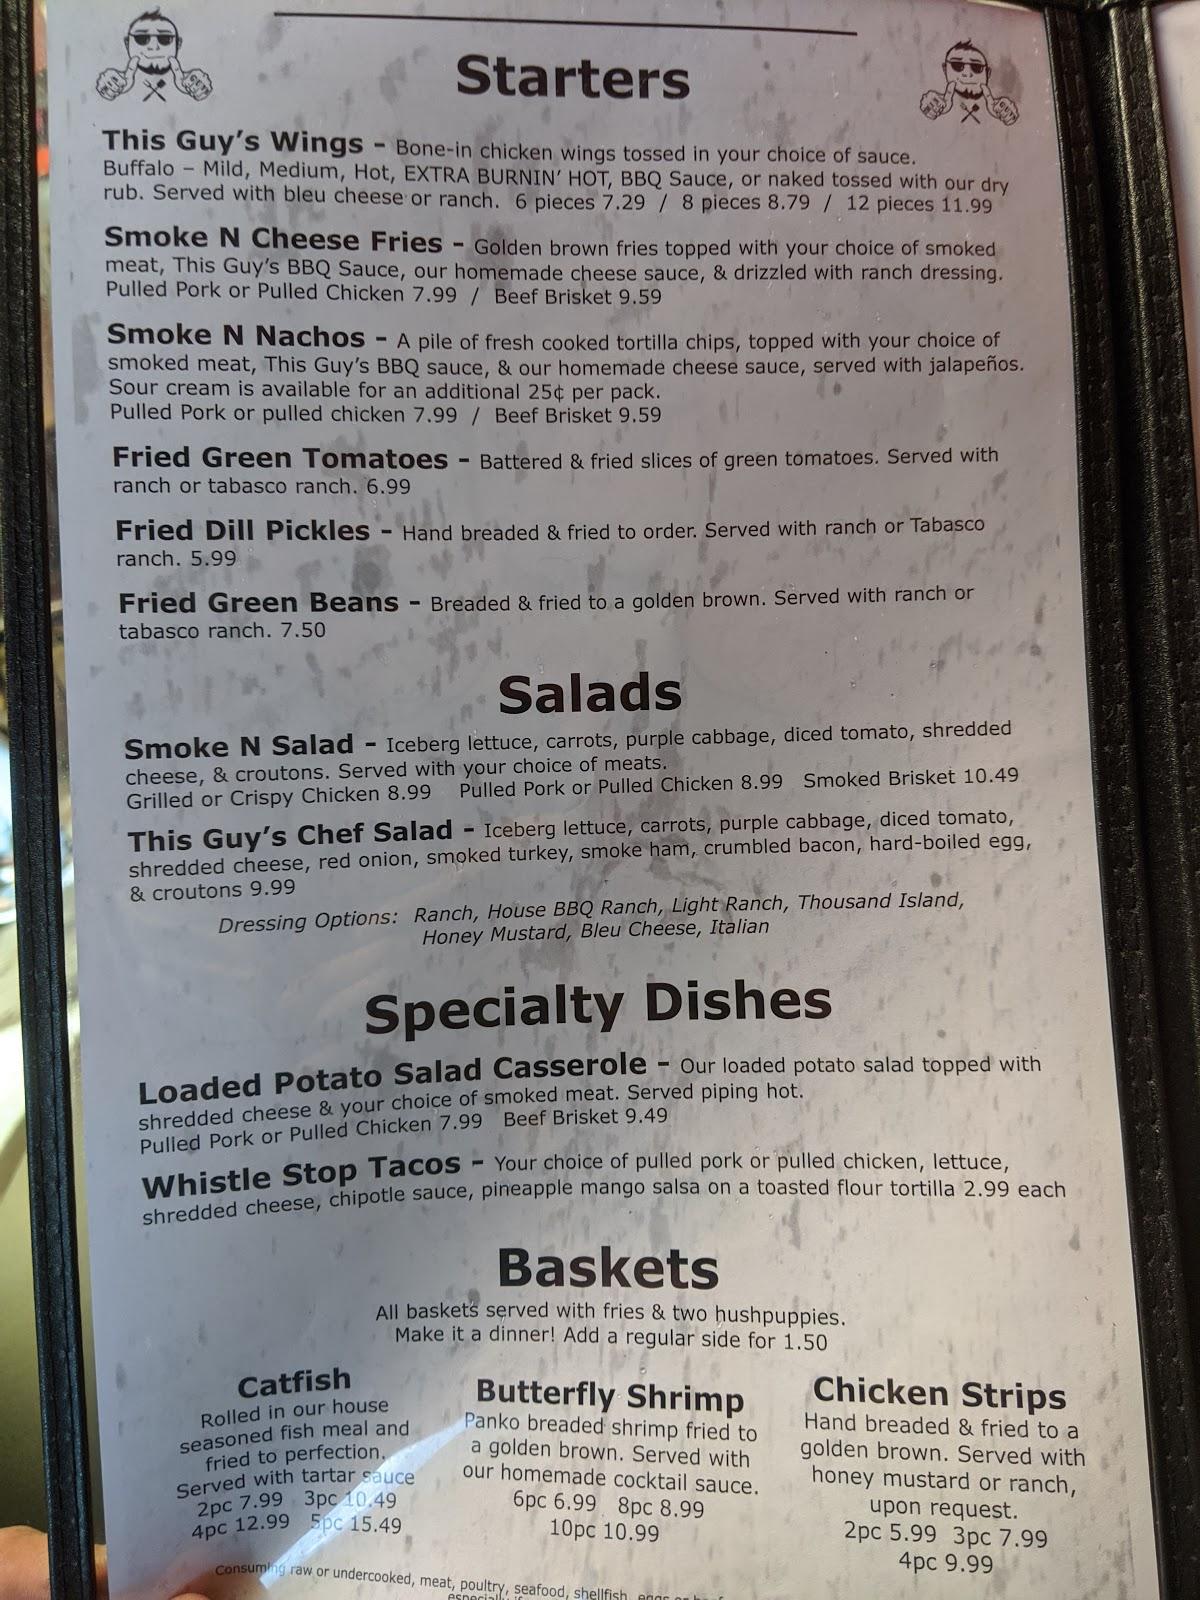 Menu at This Guy's Smoke N Grill restaurant, Searcy